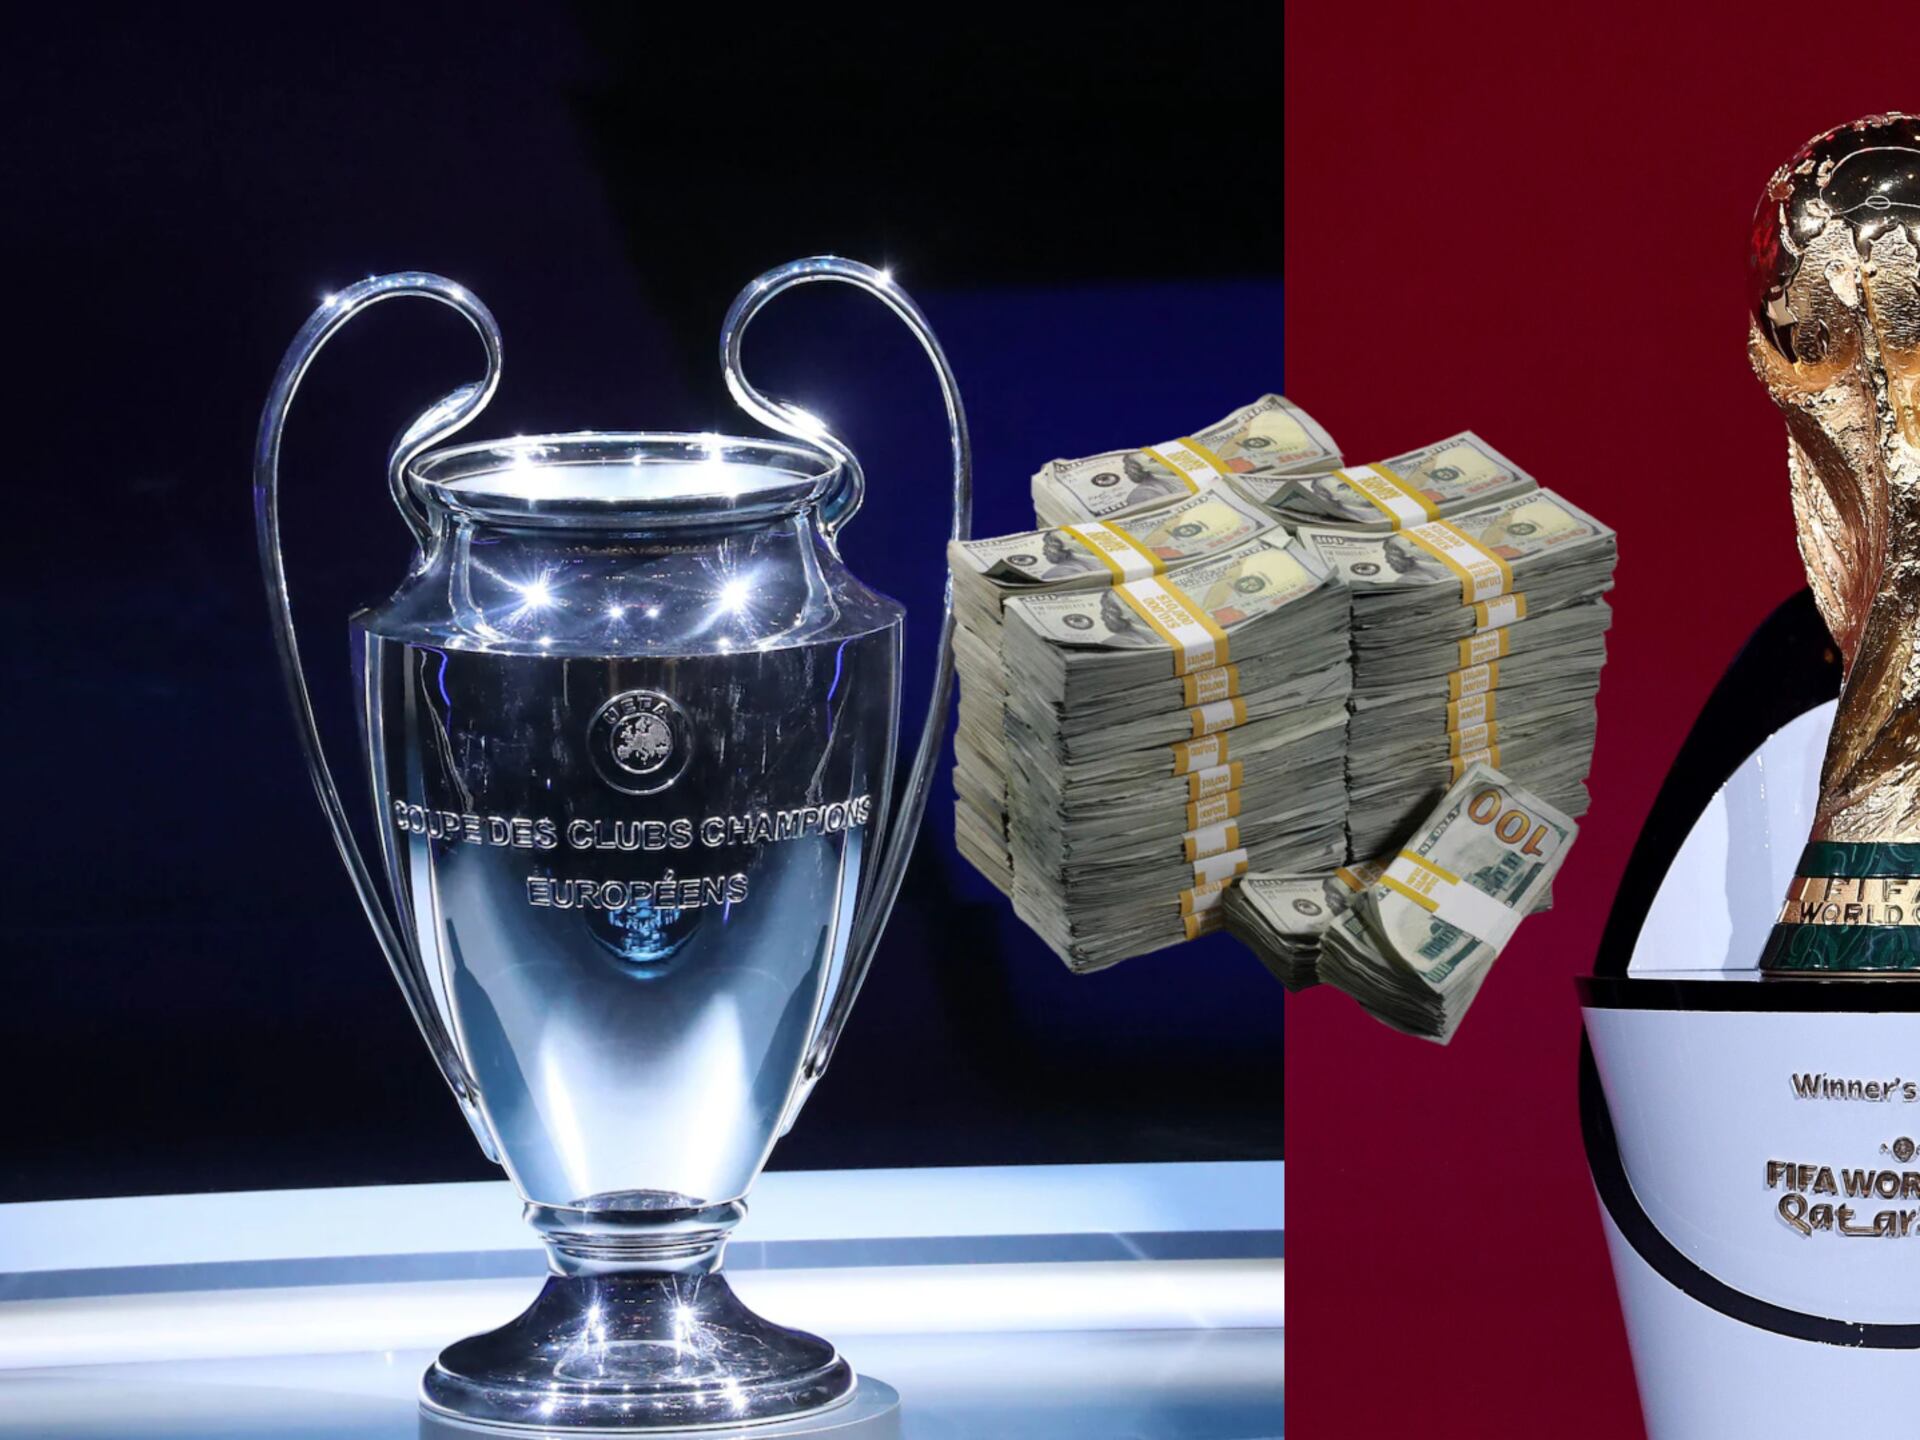 While the Champions League trophy is $15k, World Cup is worth the most